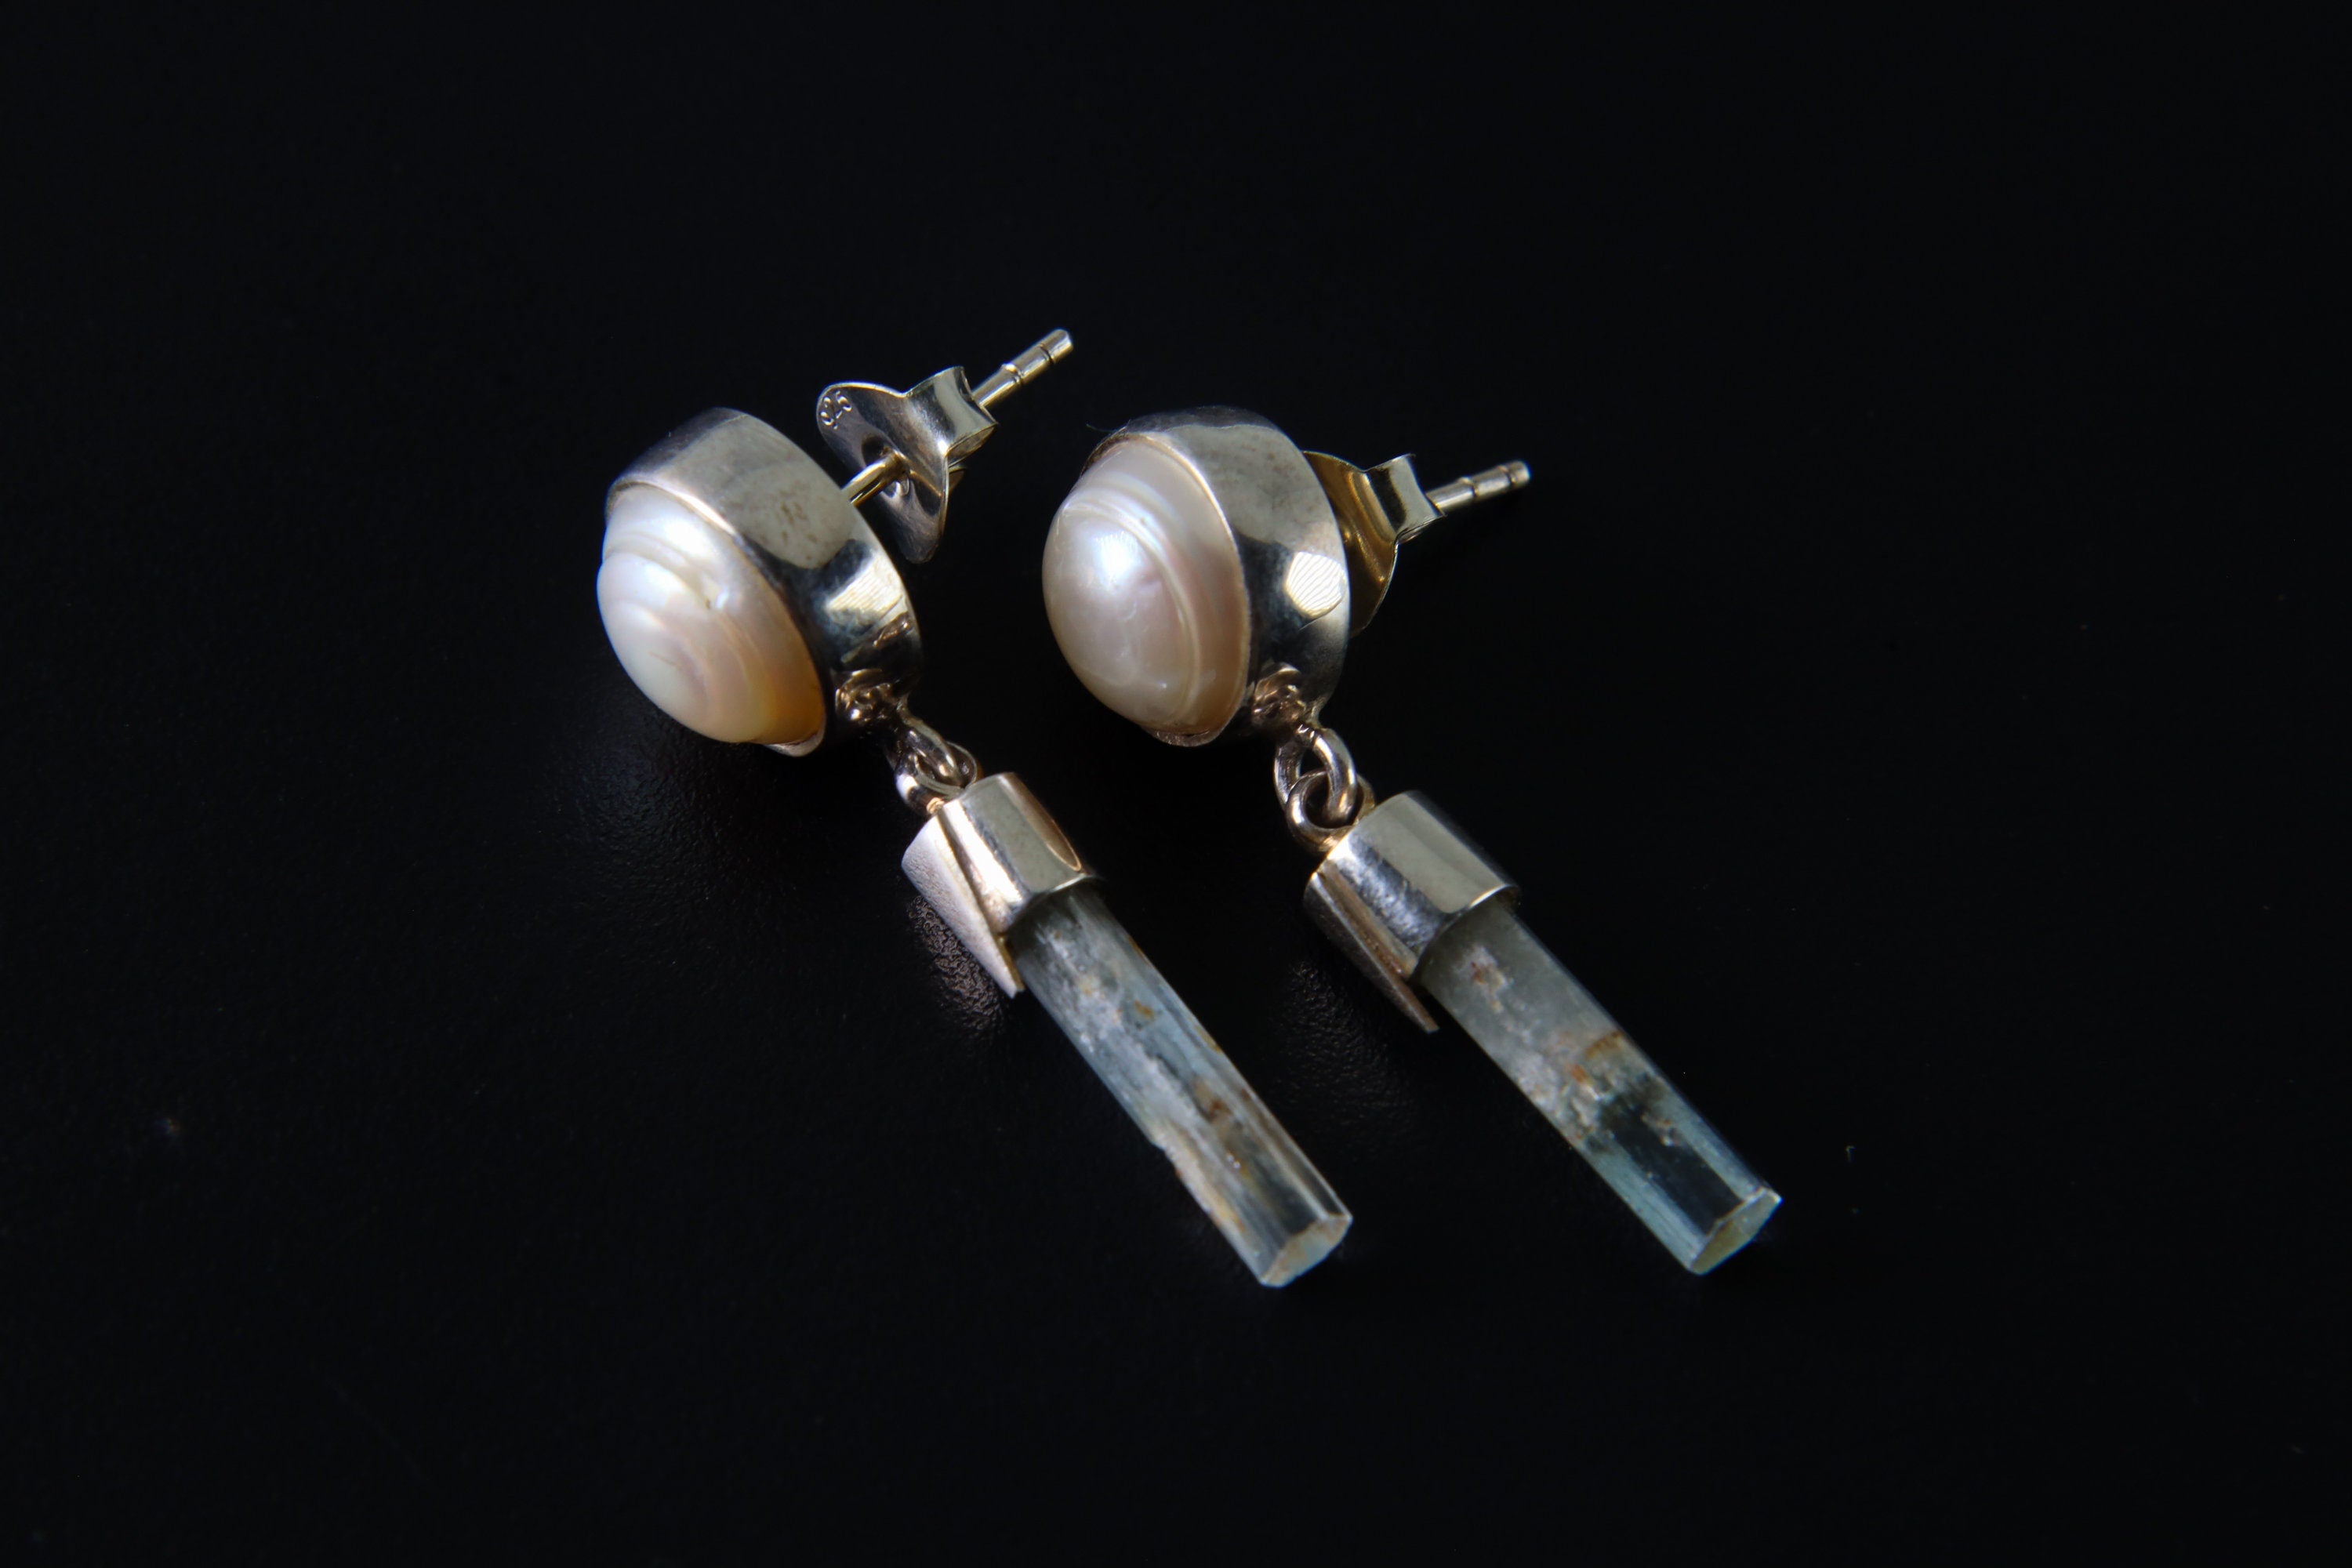 Pair of South Sea Pearls & Raw Natural Aquamarine Studs - Polished Sterling Silver - Dangle Stud Earring